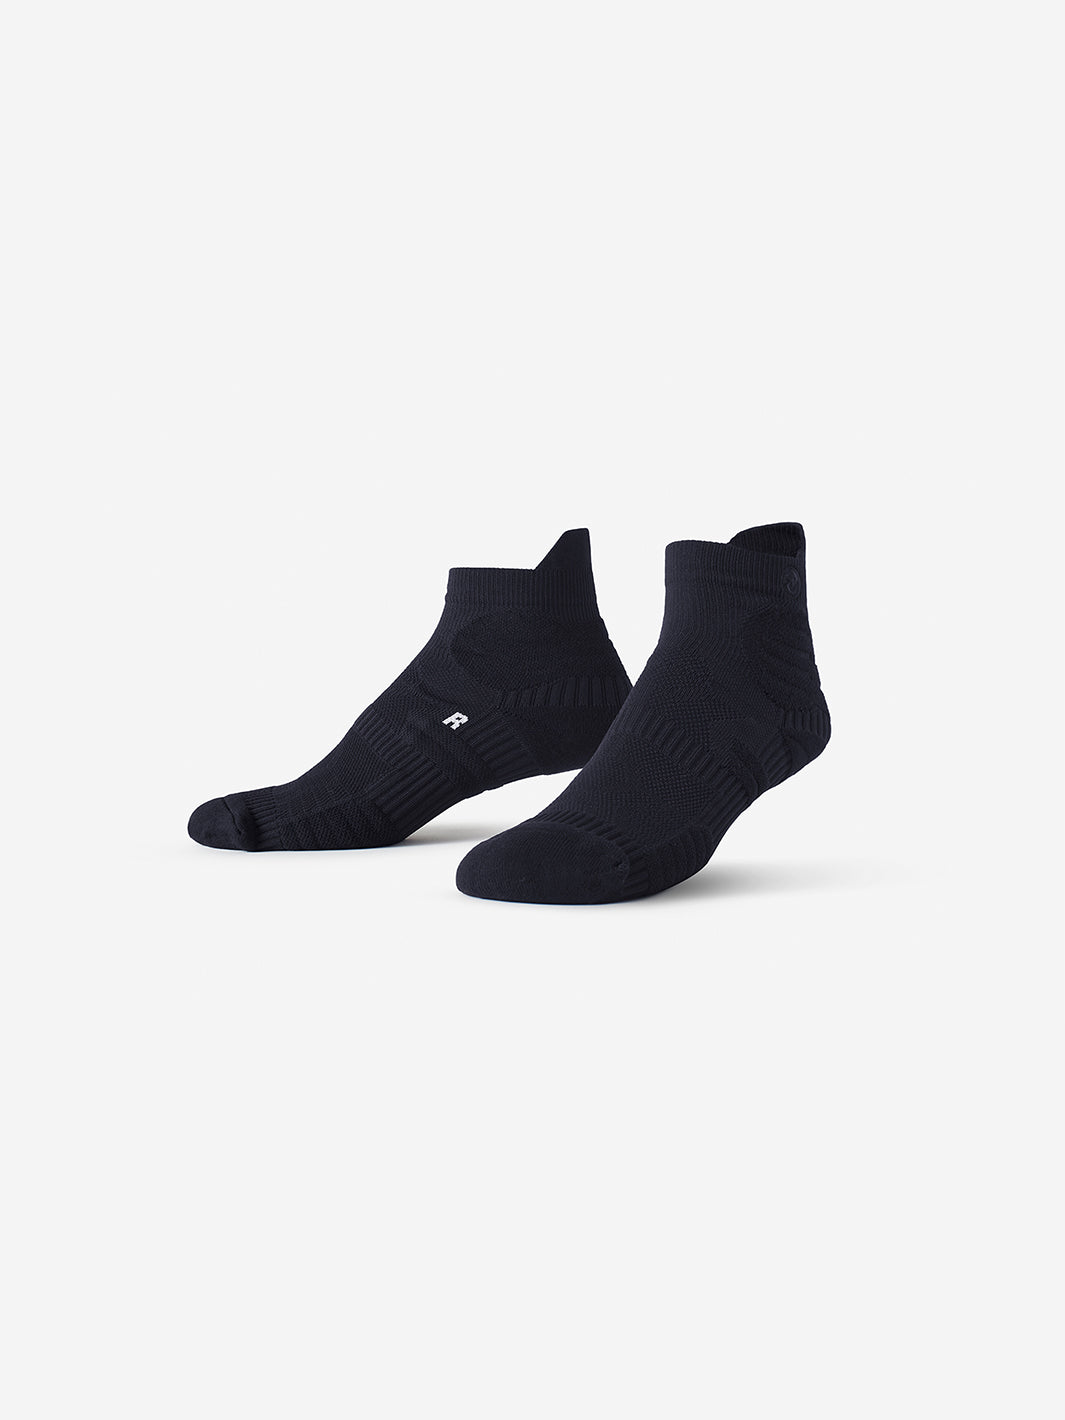 Black Cushioned Everyday Ankle Sock by SMRTFT